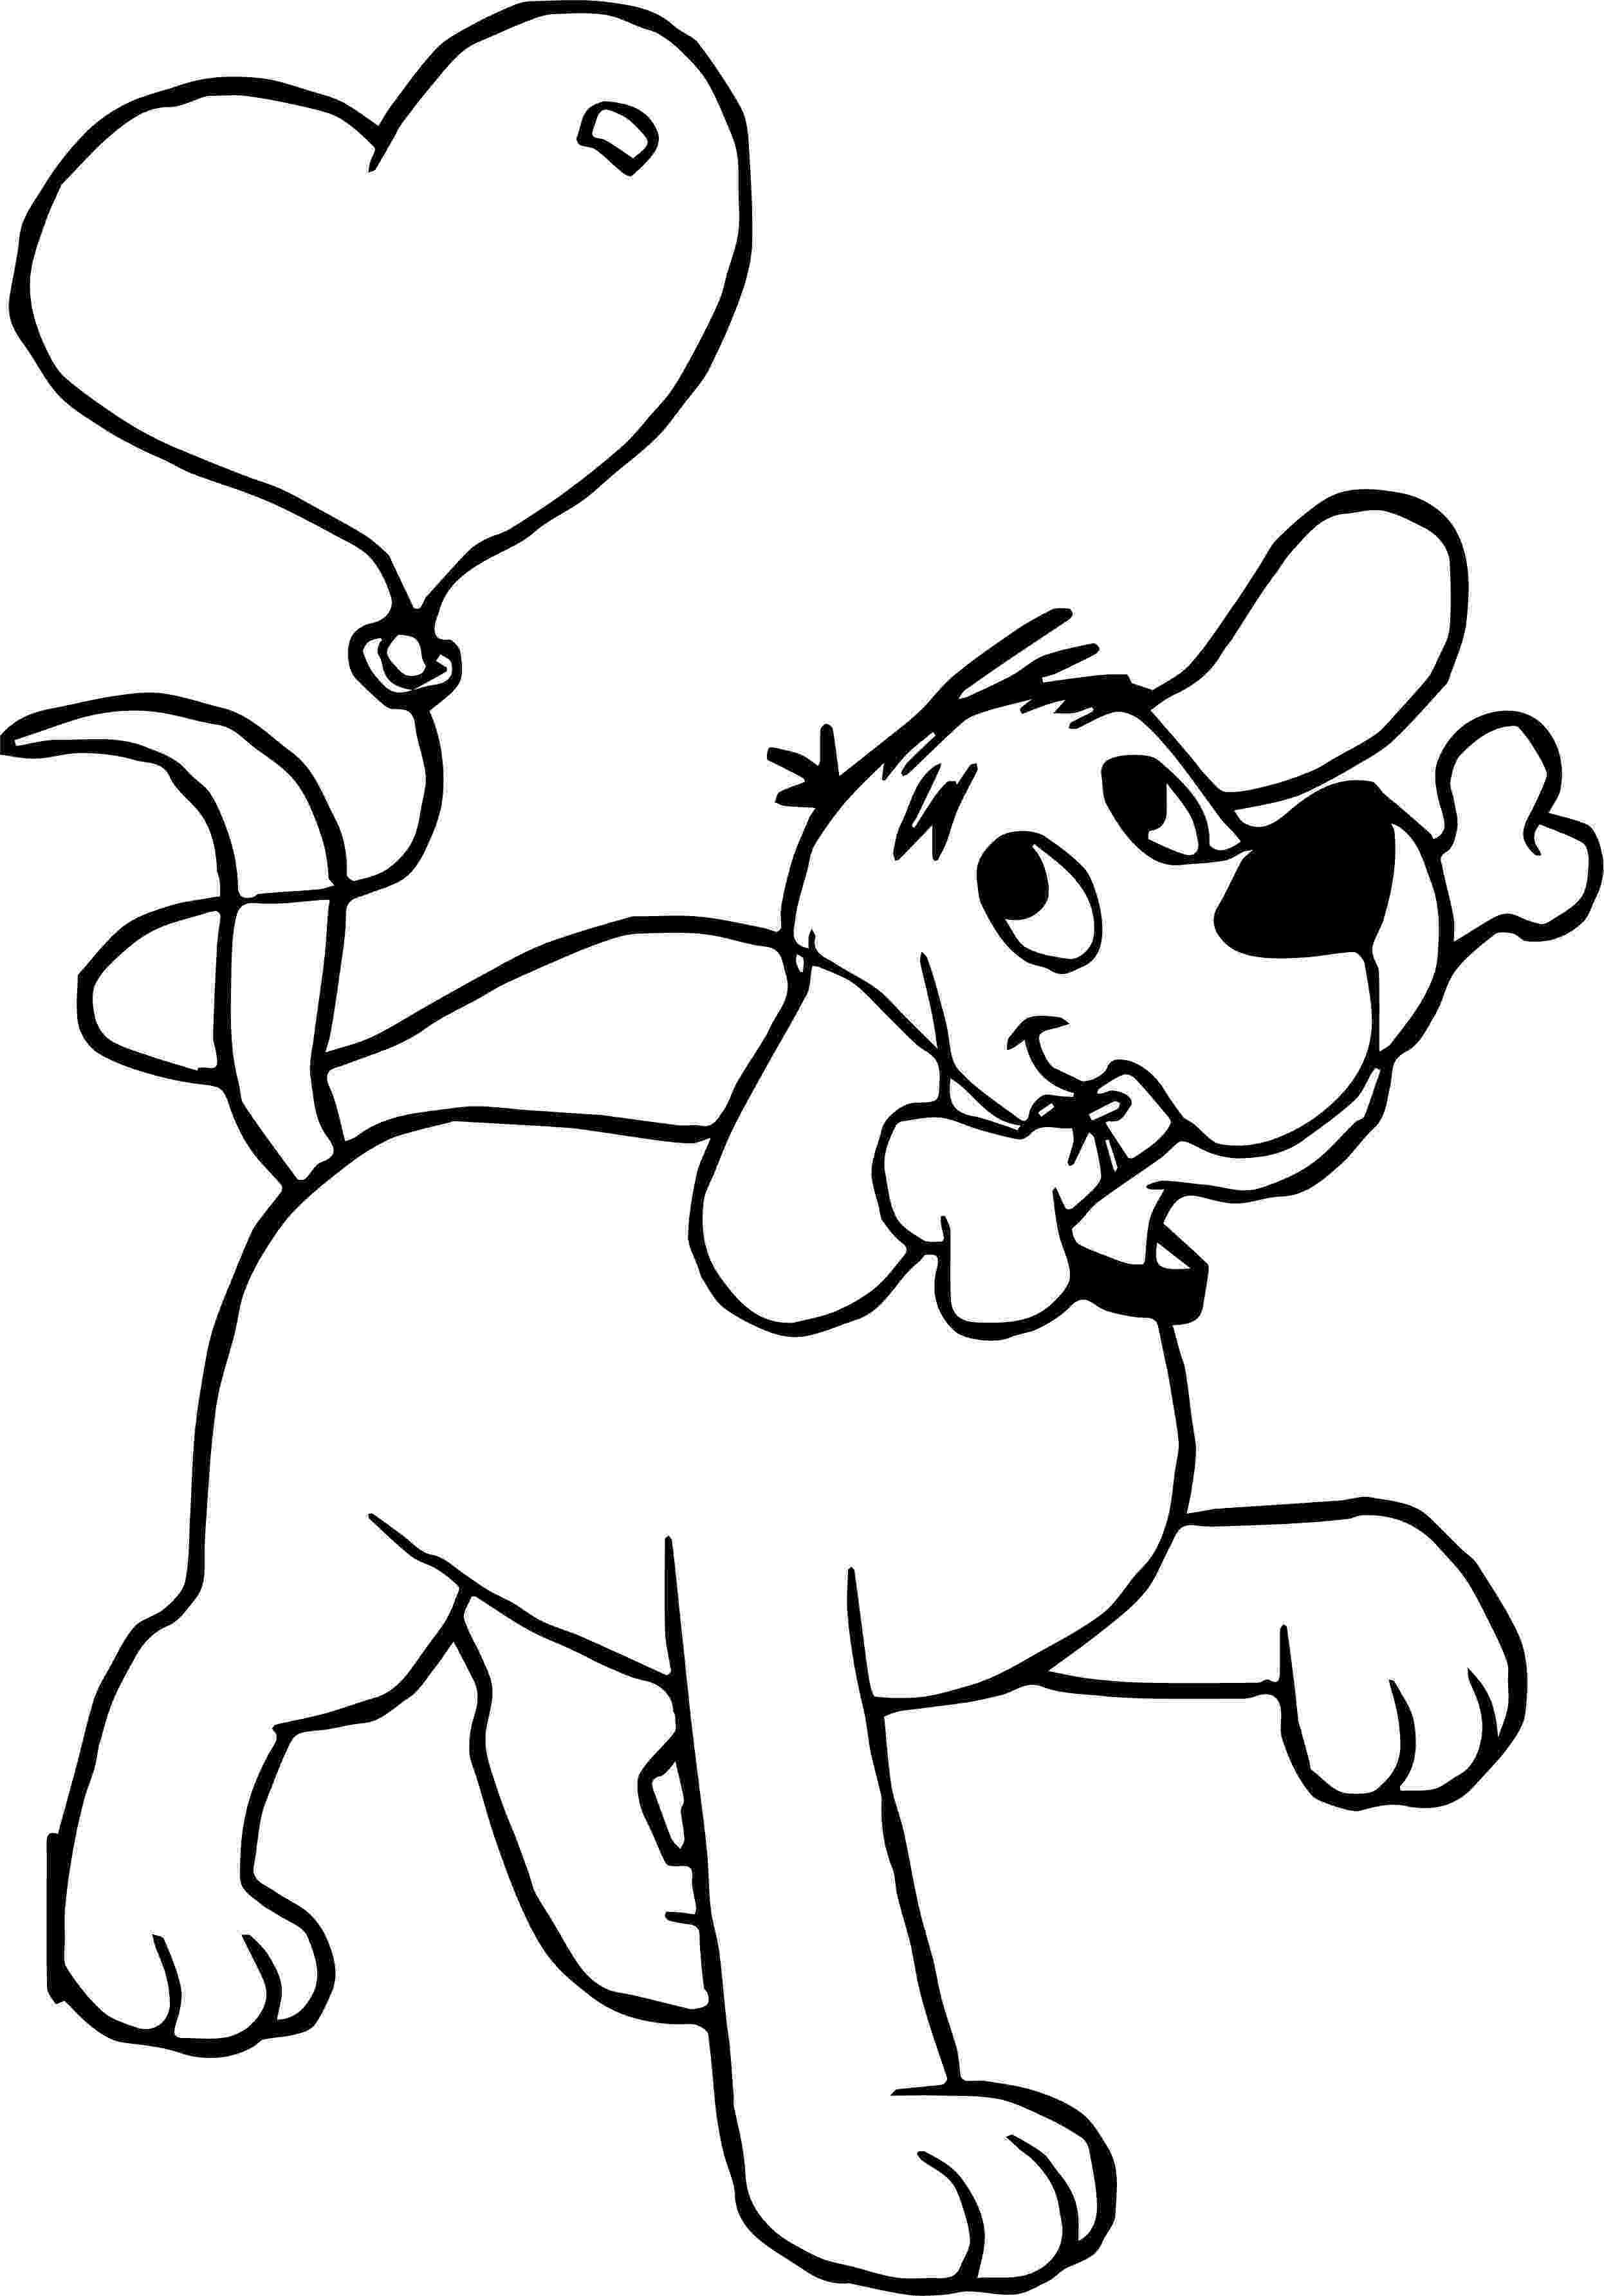 free dog coloring pages dogs to download for free dogs kids coloring pages free dog coloring pages 